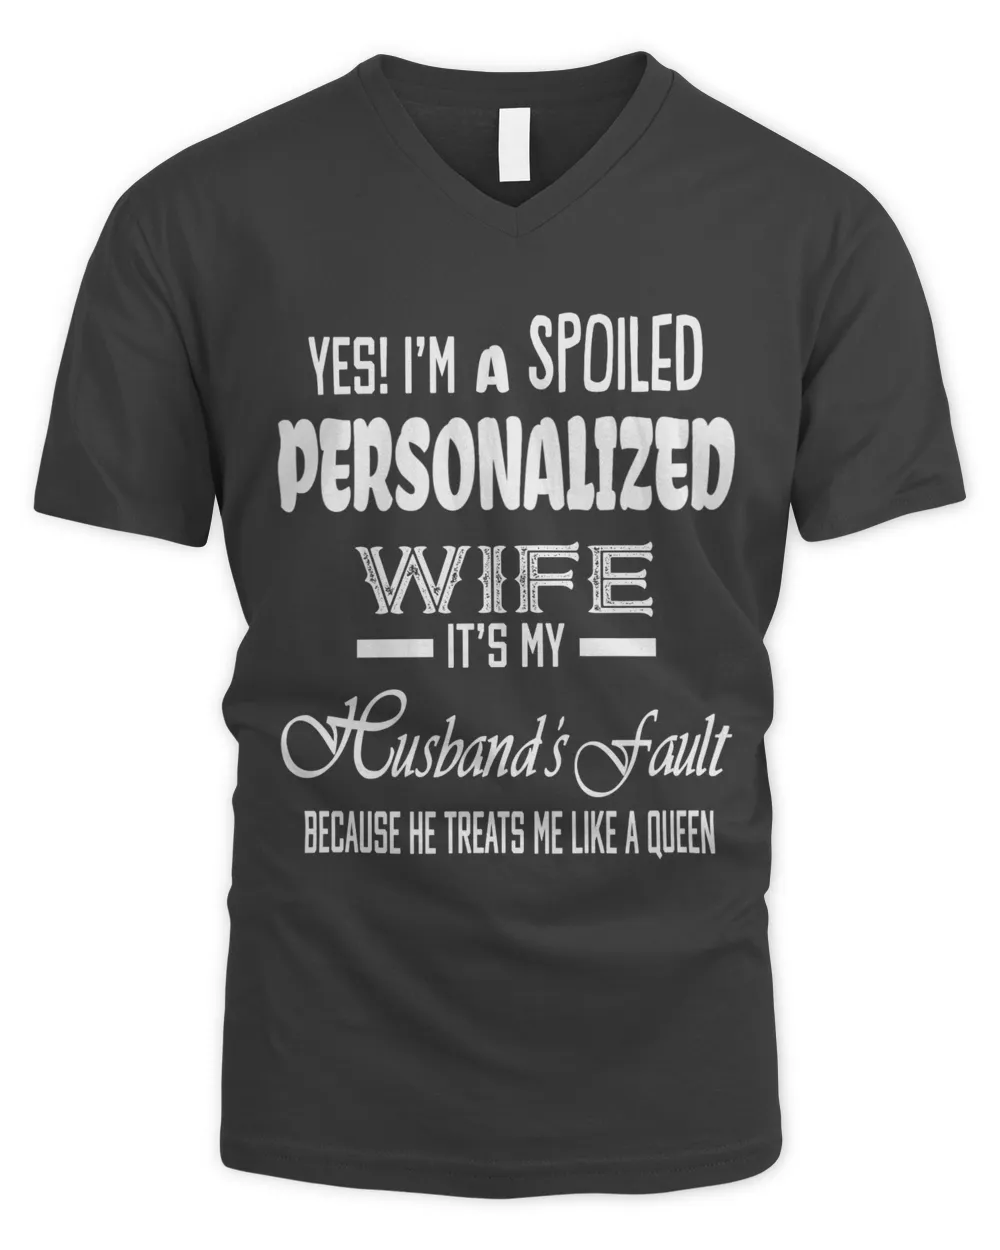 PERSONALIZED - Yes, I'm SPOILED .... WIFE